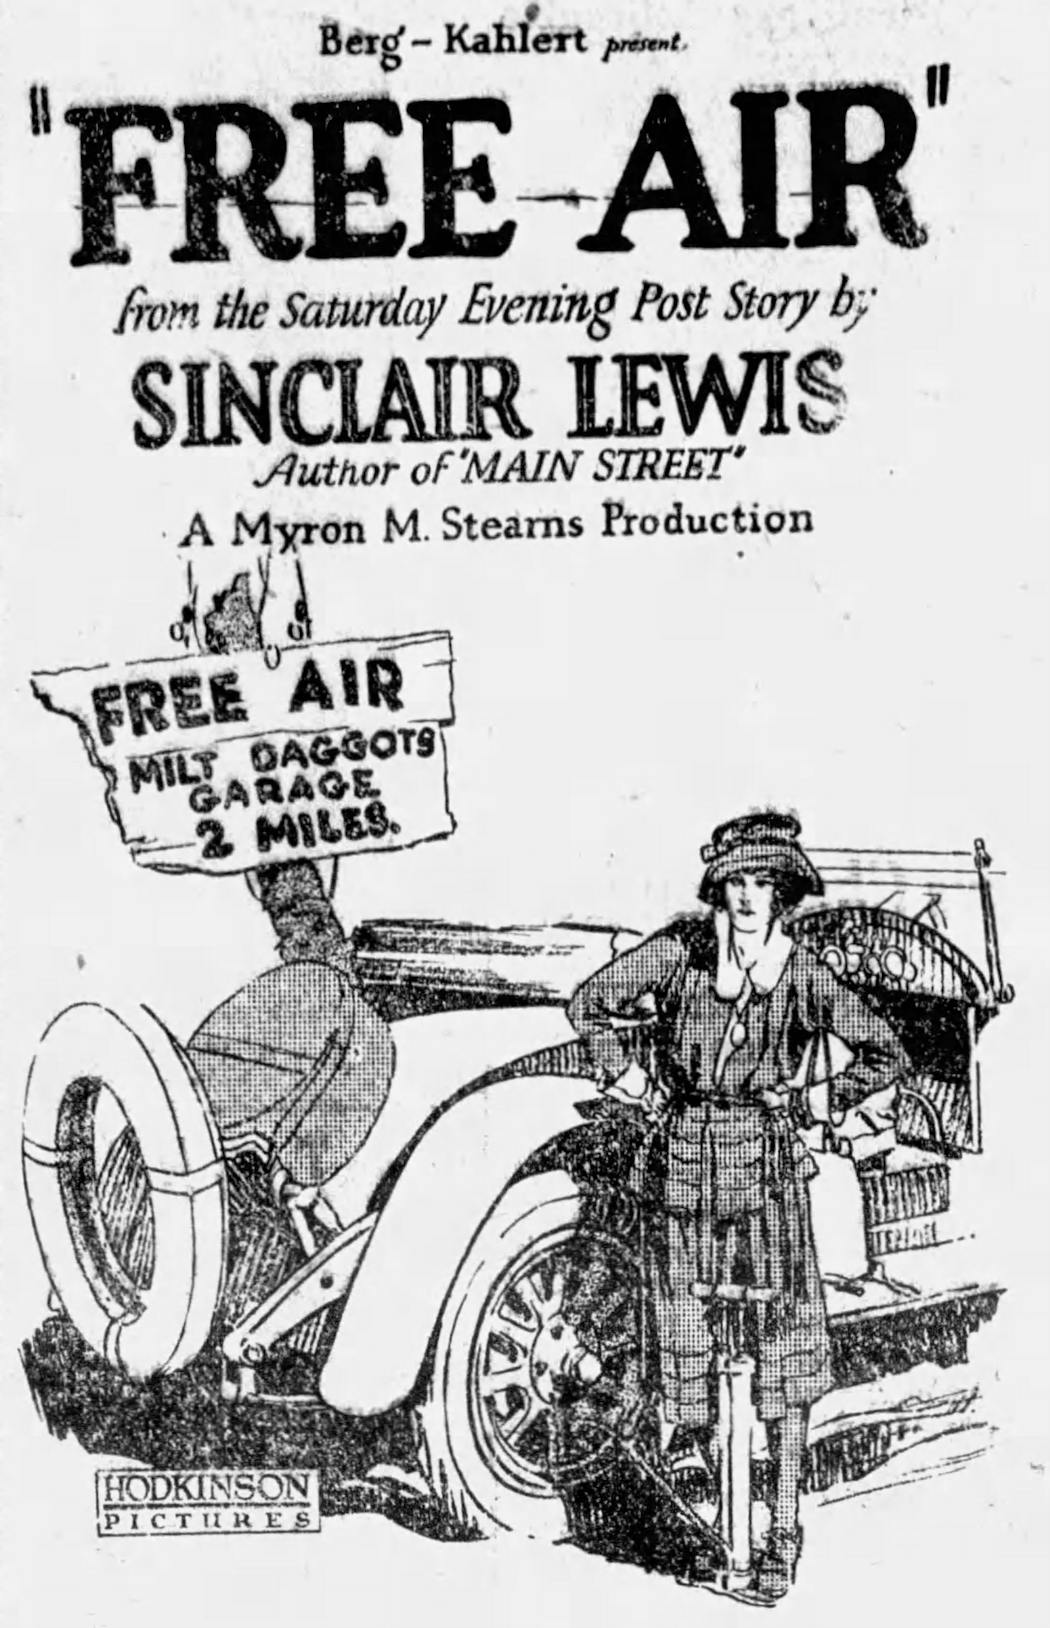 An ad for 'Free Air' that appeared in an Alabama newspaper in 1922.